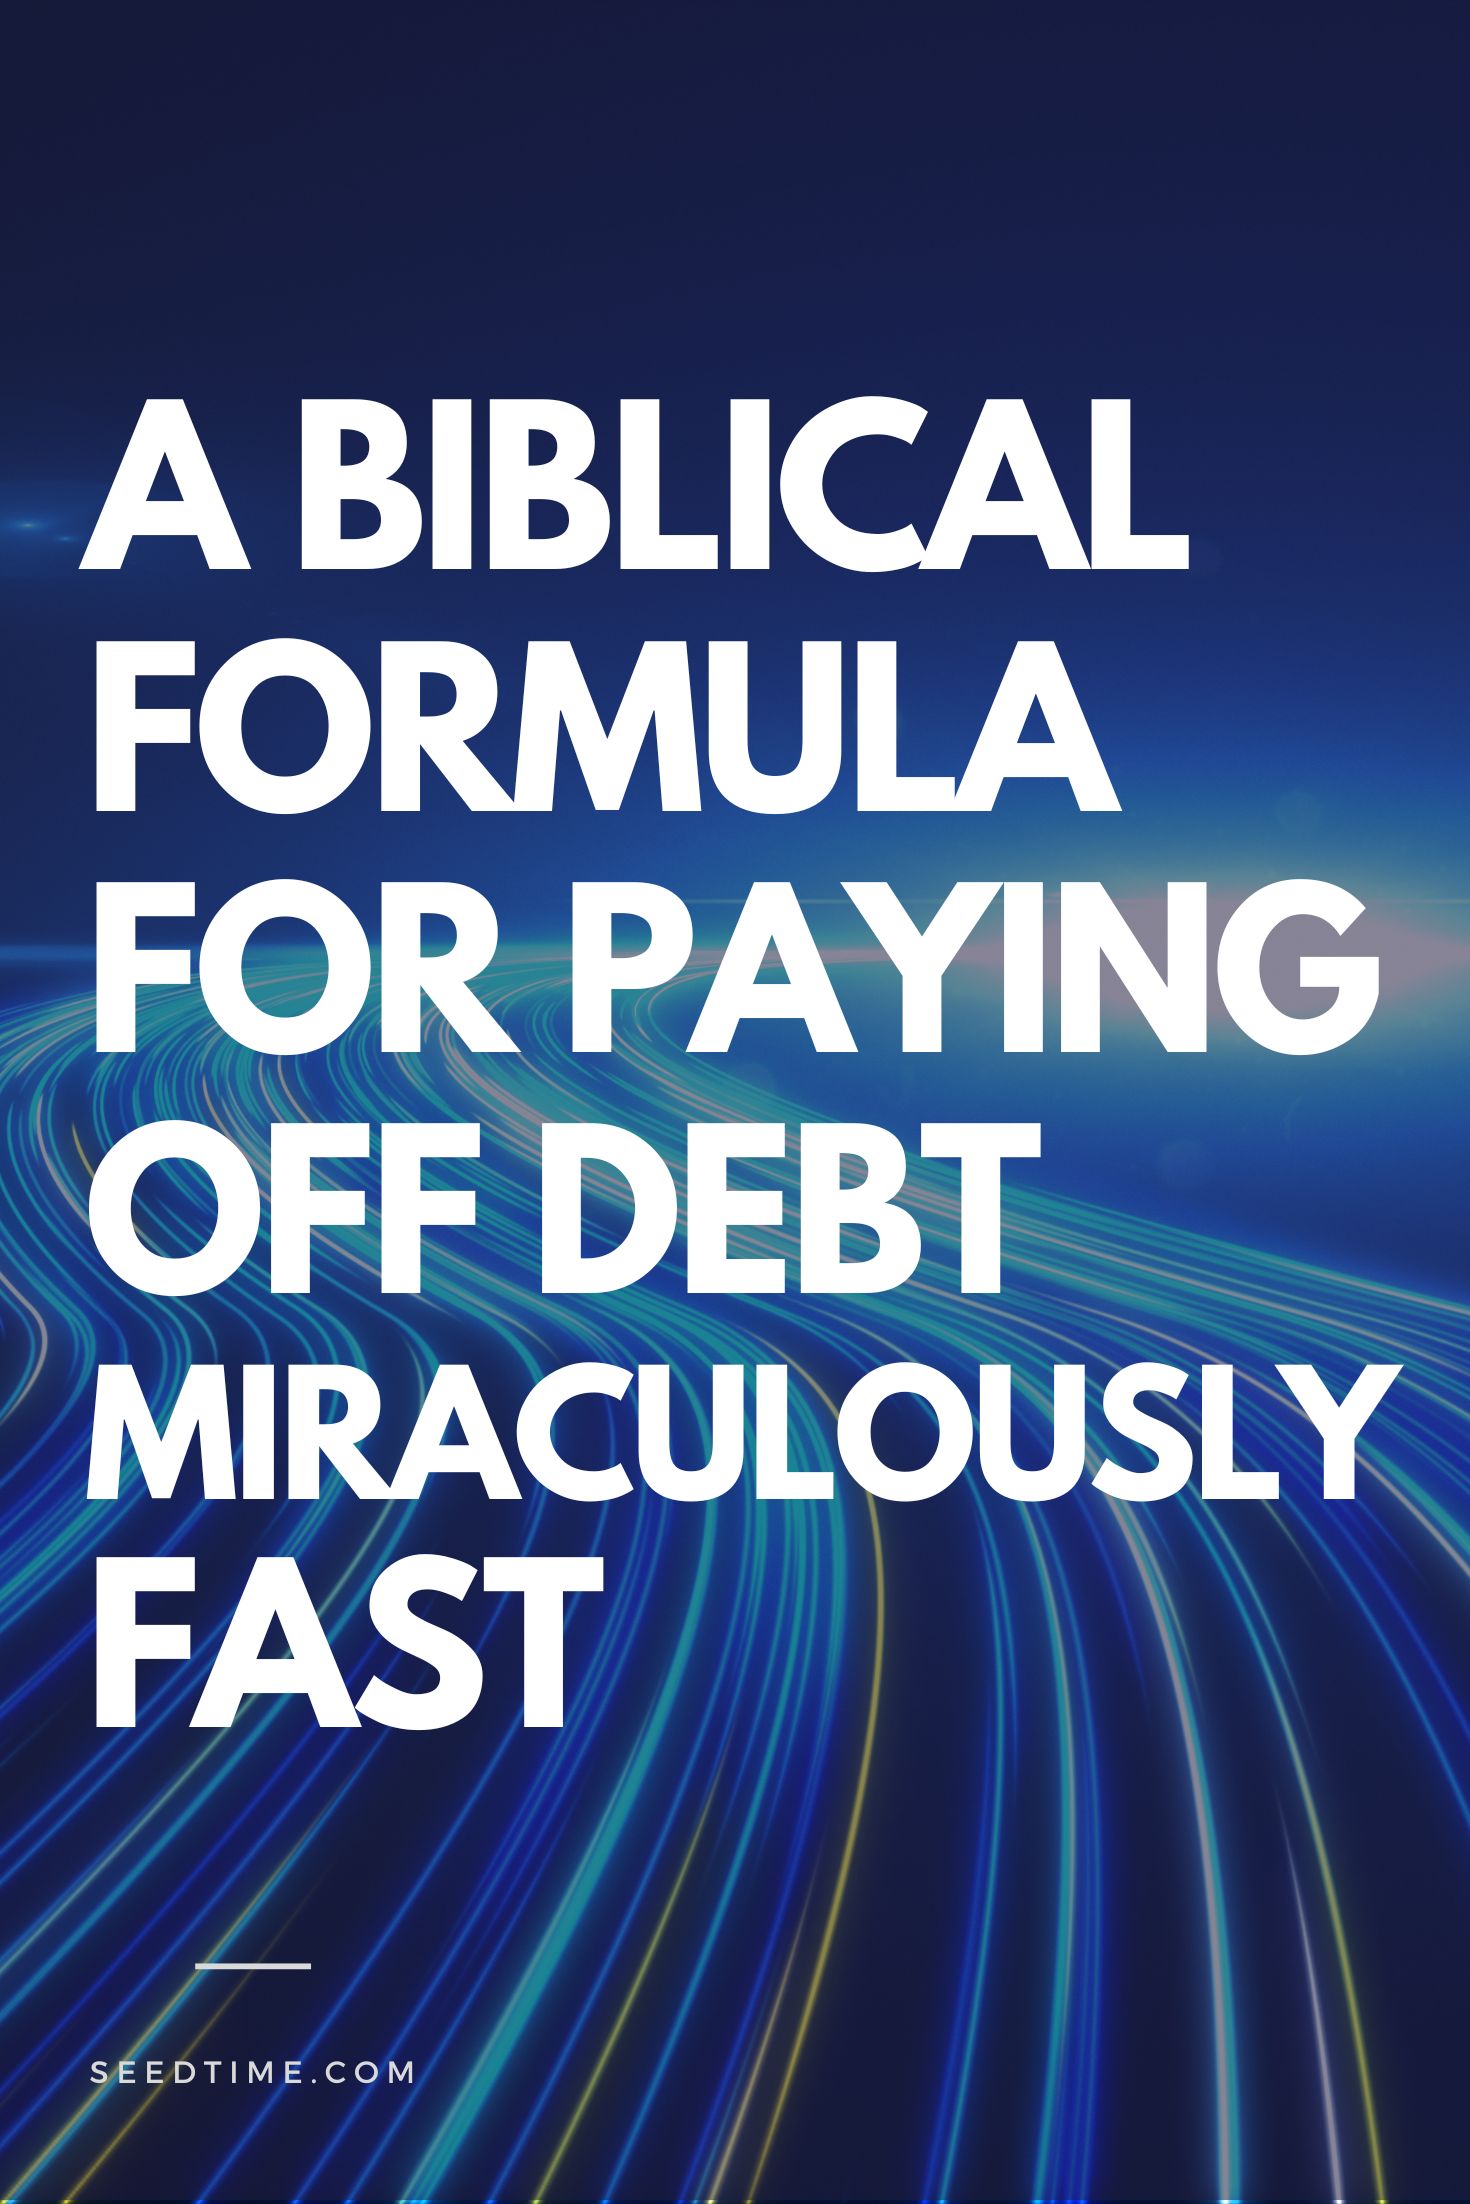 A Biblical Formula for paying off debt miraculously fast